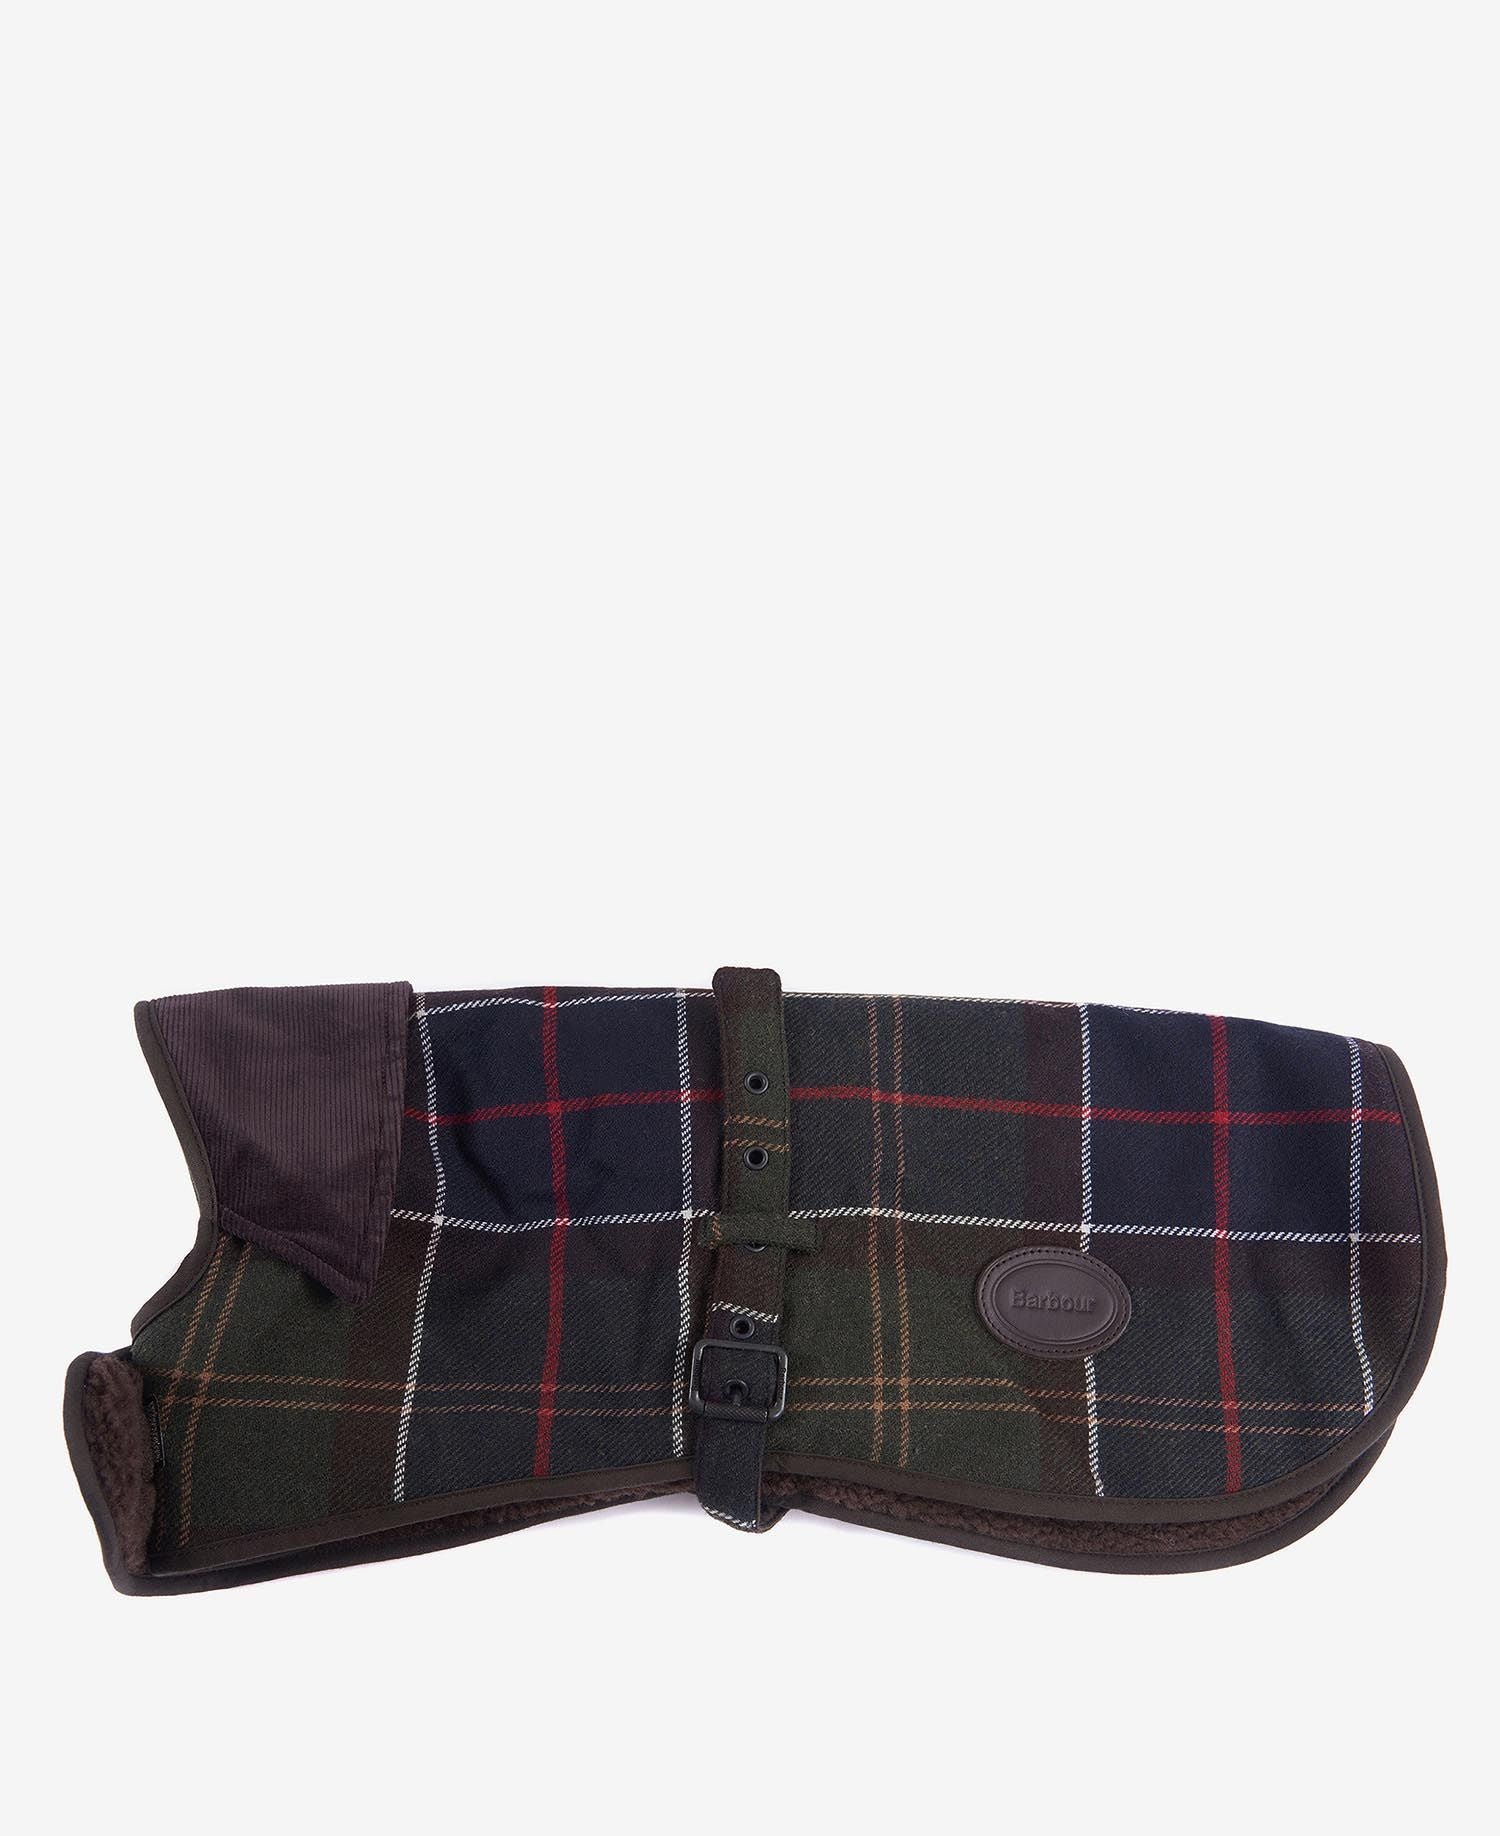 Barbour - Wool Touch Dog Coat - Classic Tartan